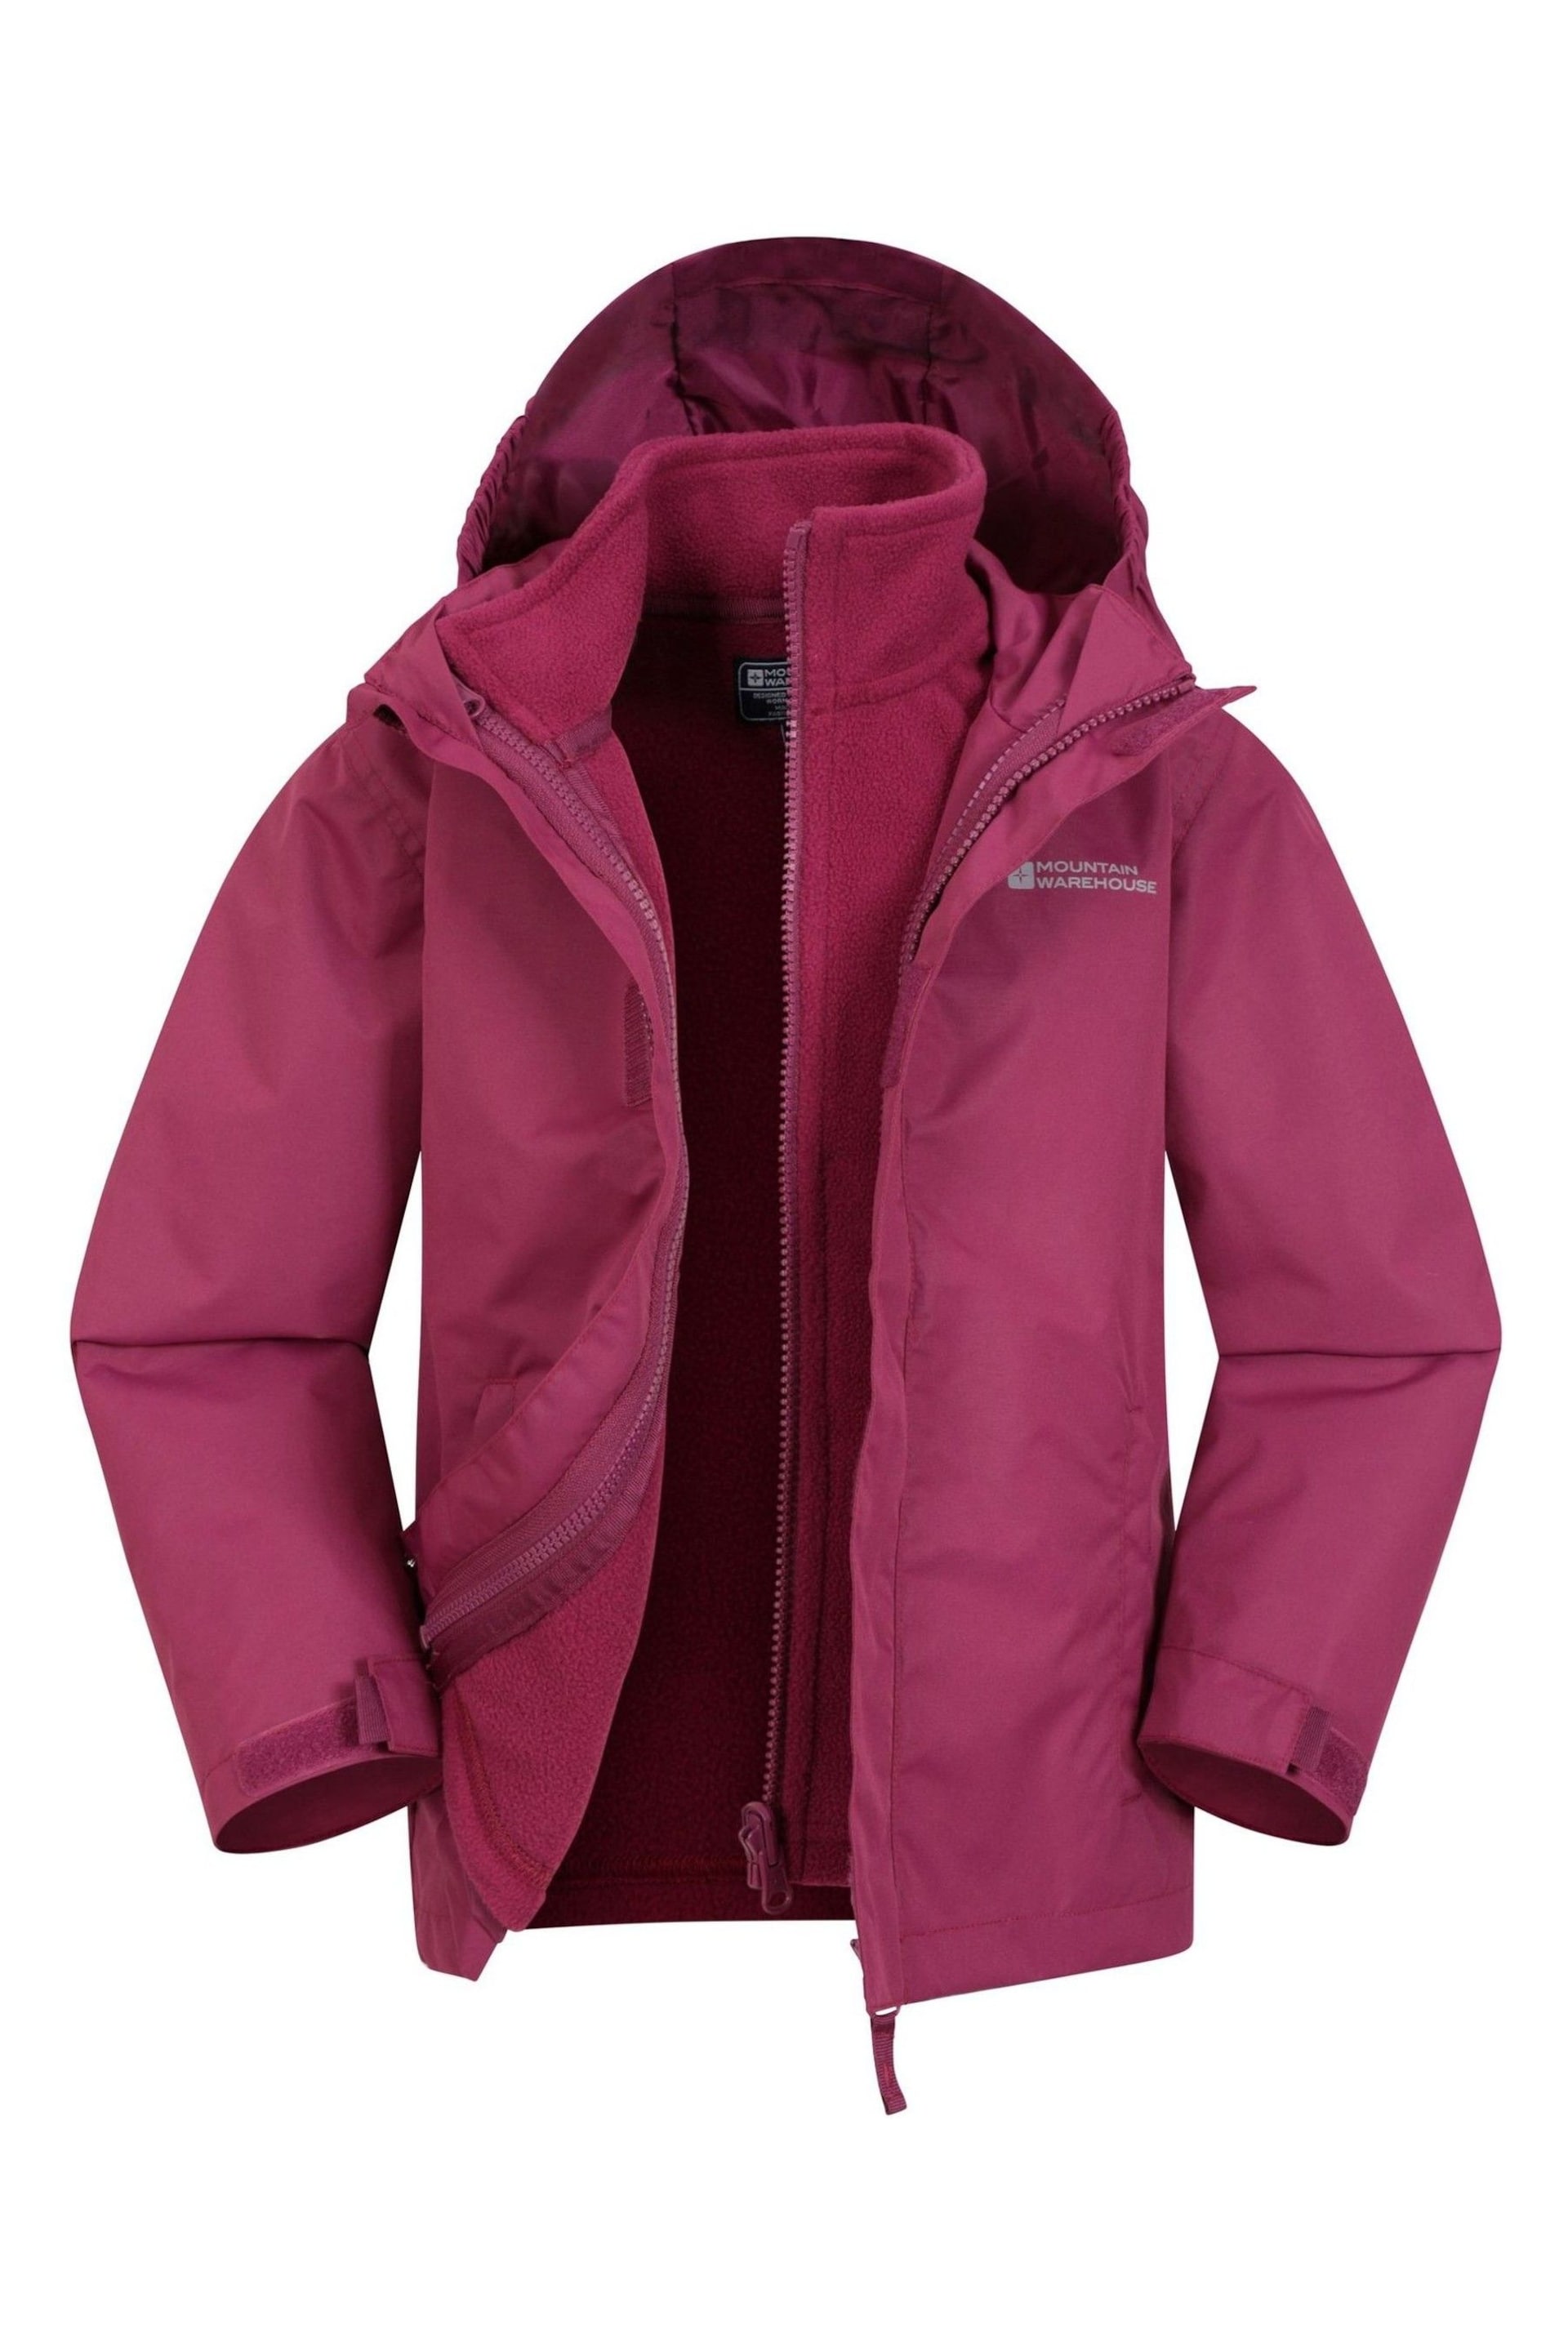 Mountain Warehouse Red Fell Kids 3 In 1 Water Resistant Jacket - Image 1 of 5